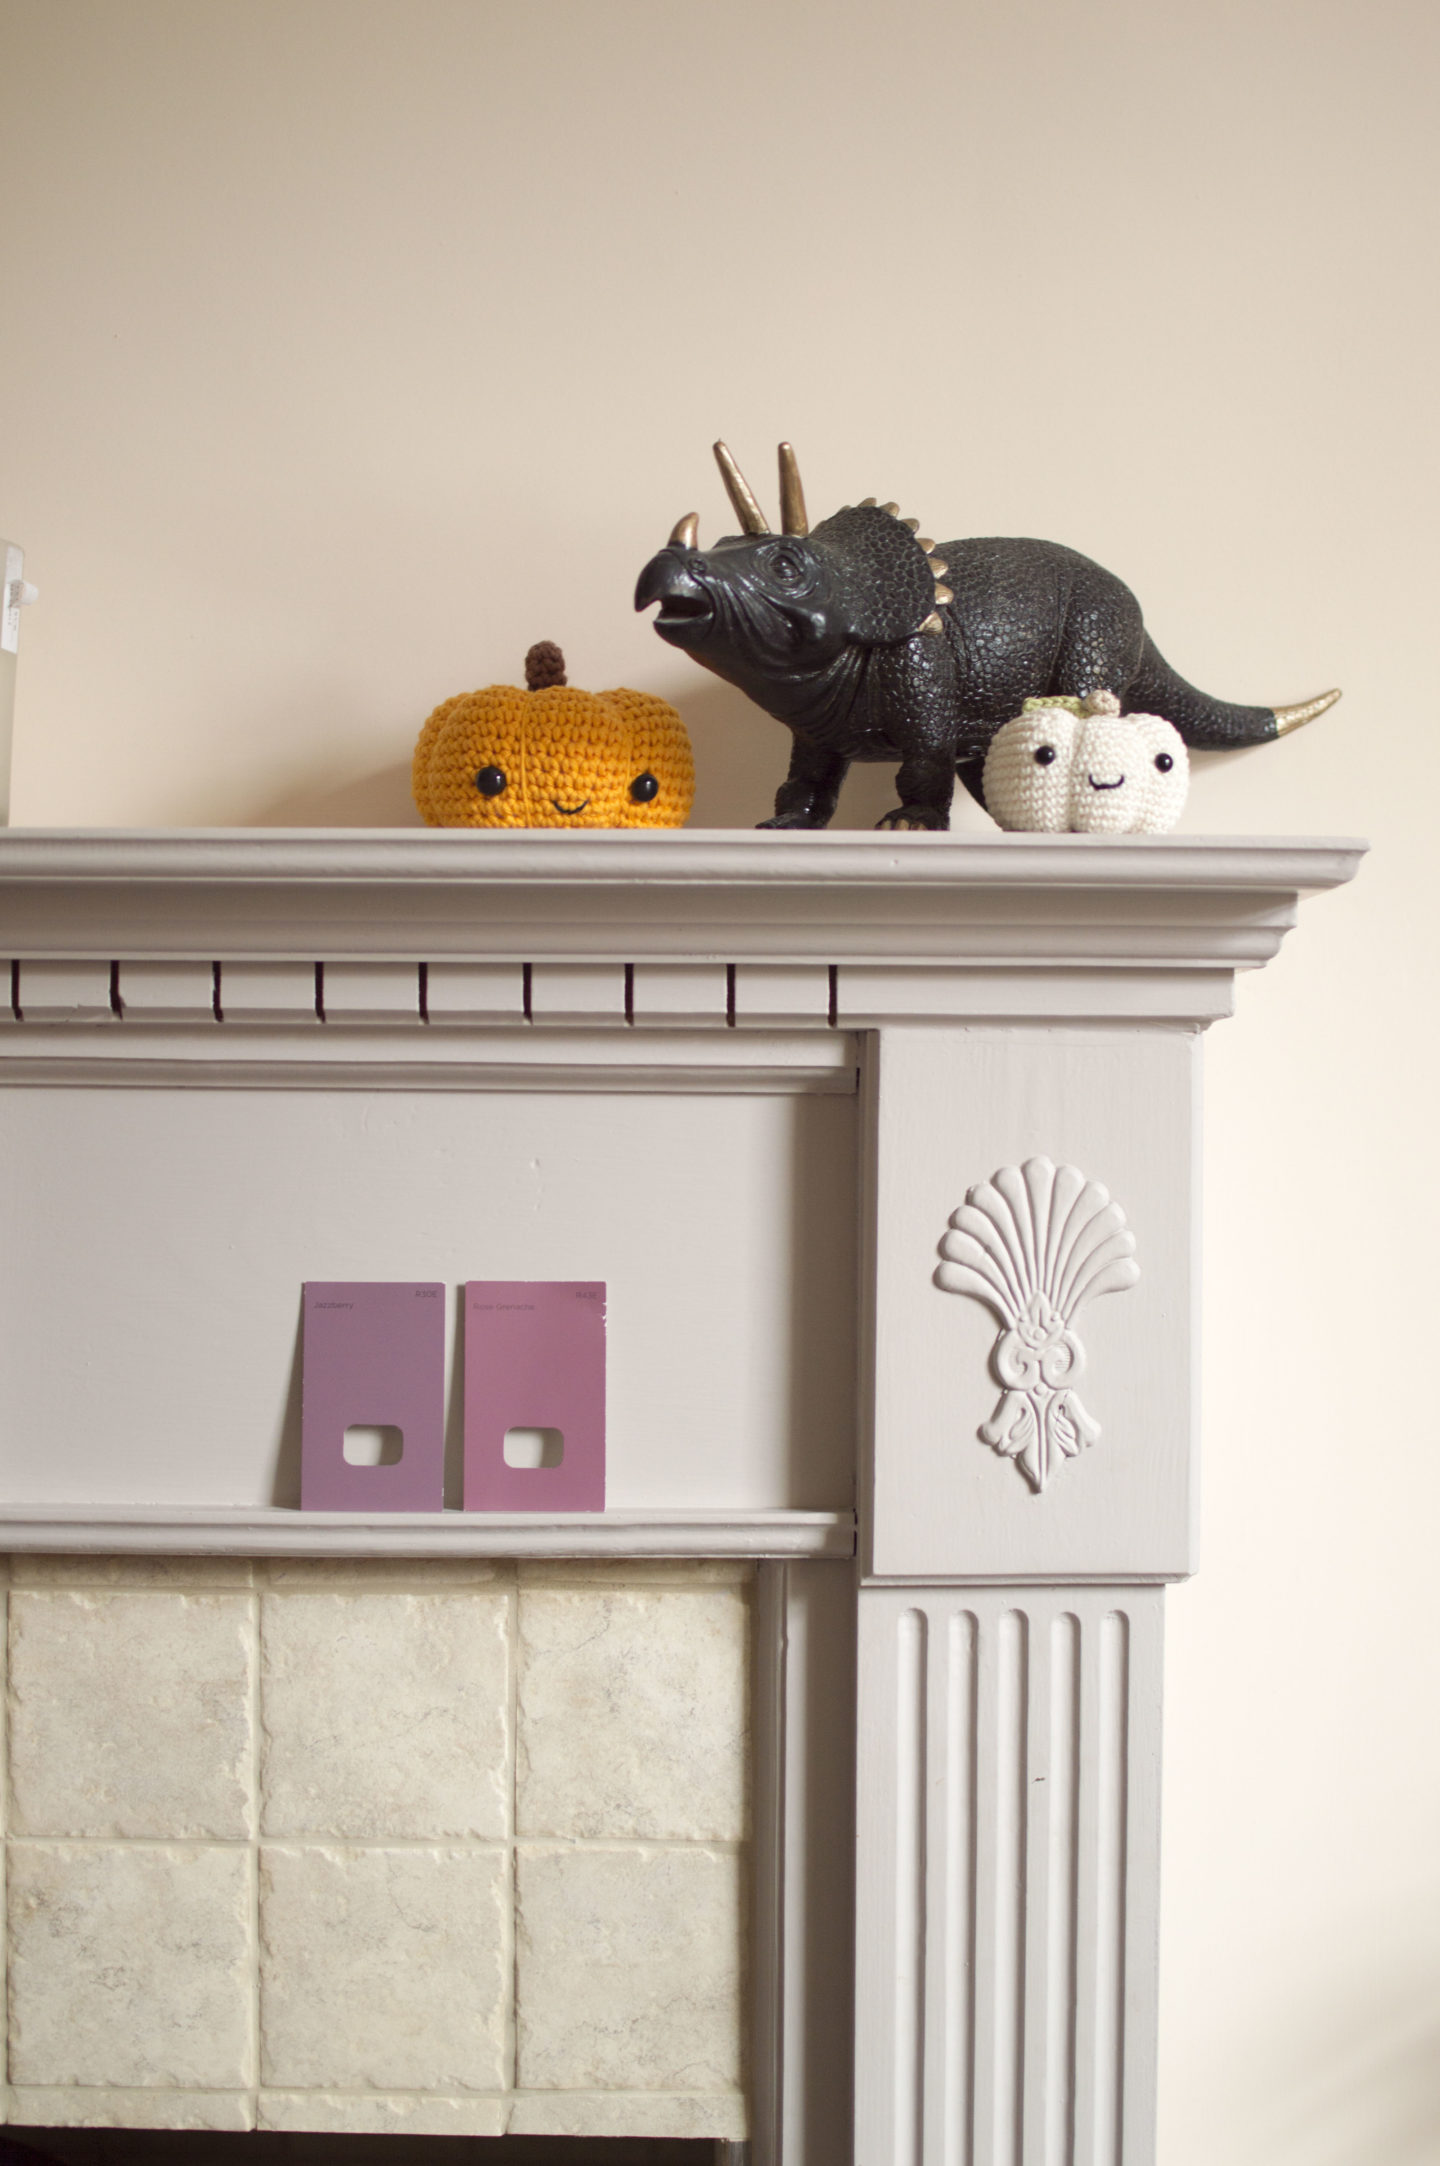 How To Paint A Fireplace Surround, Painting A Wooden Fireplace Surround White